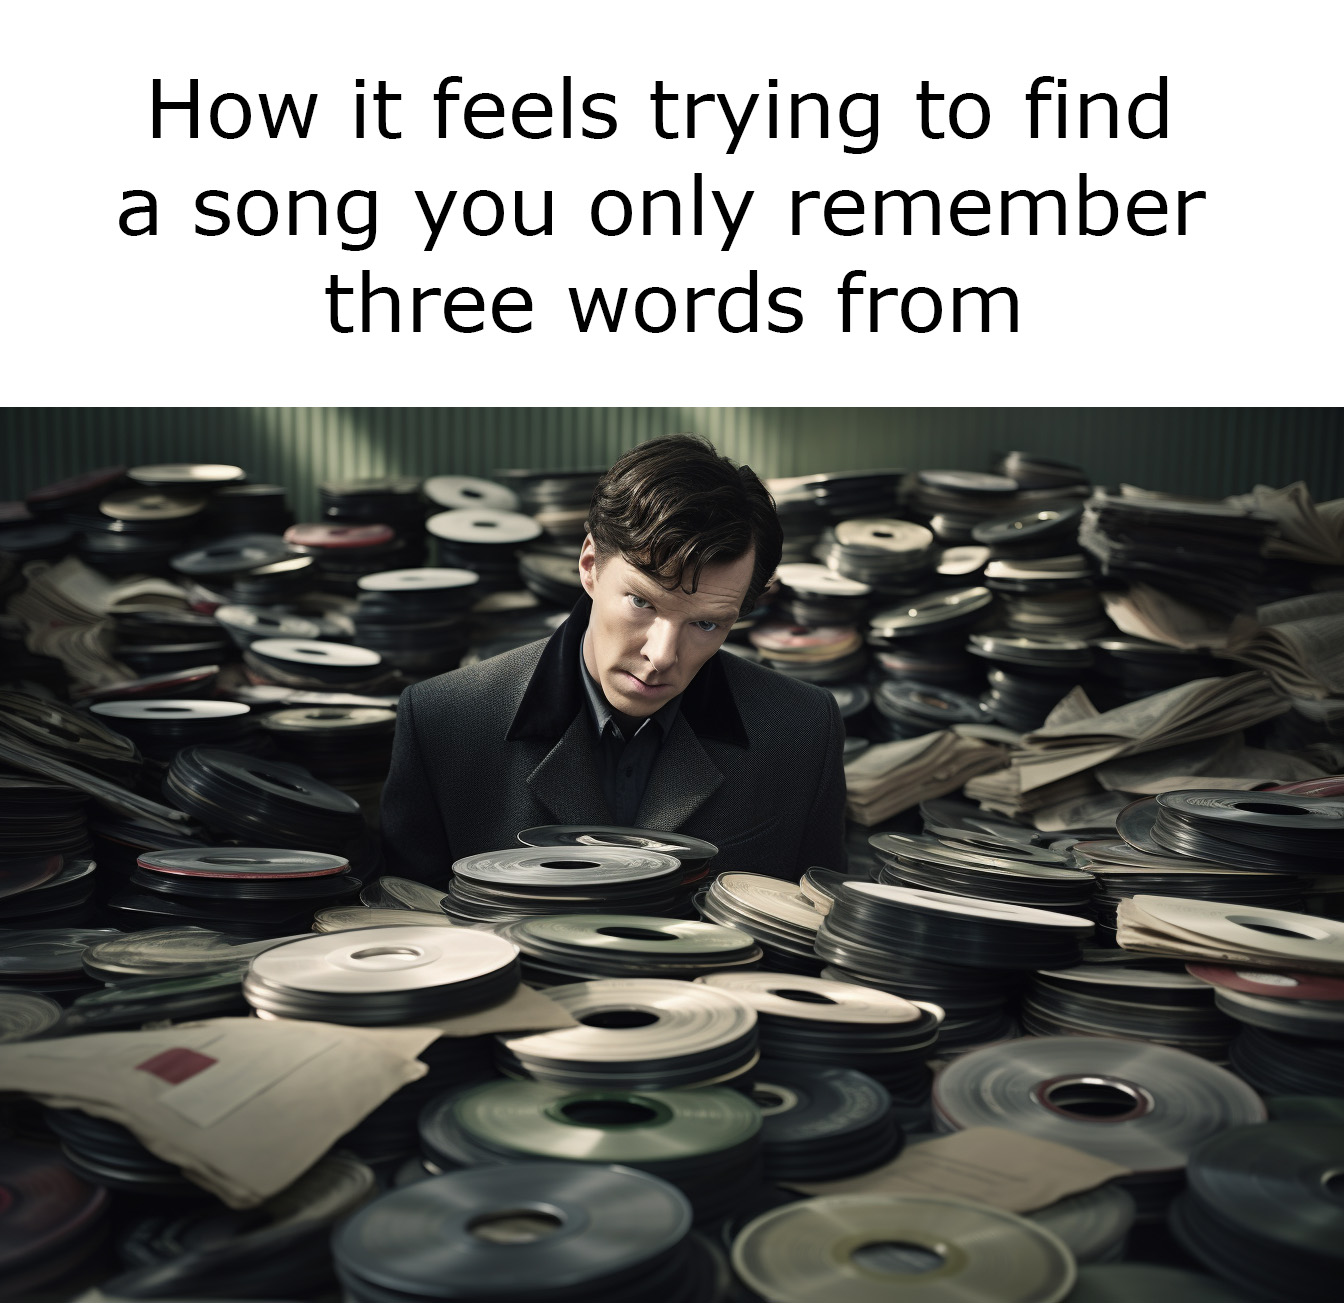 37 funny memes and pics -  human behavior - How it feels trying to find a song you only remember three words from Full